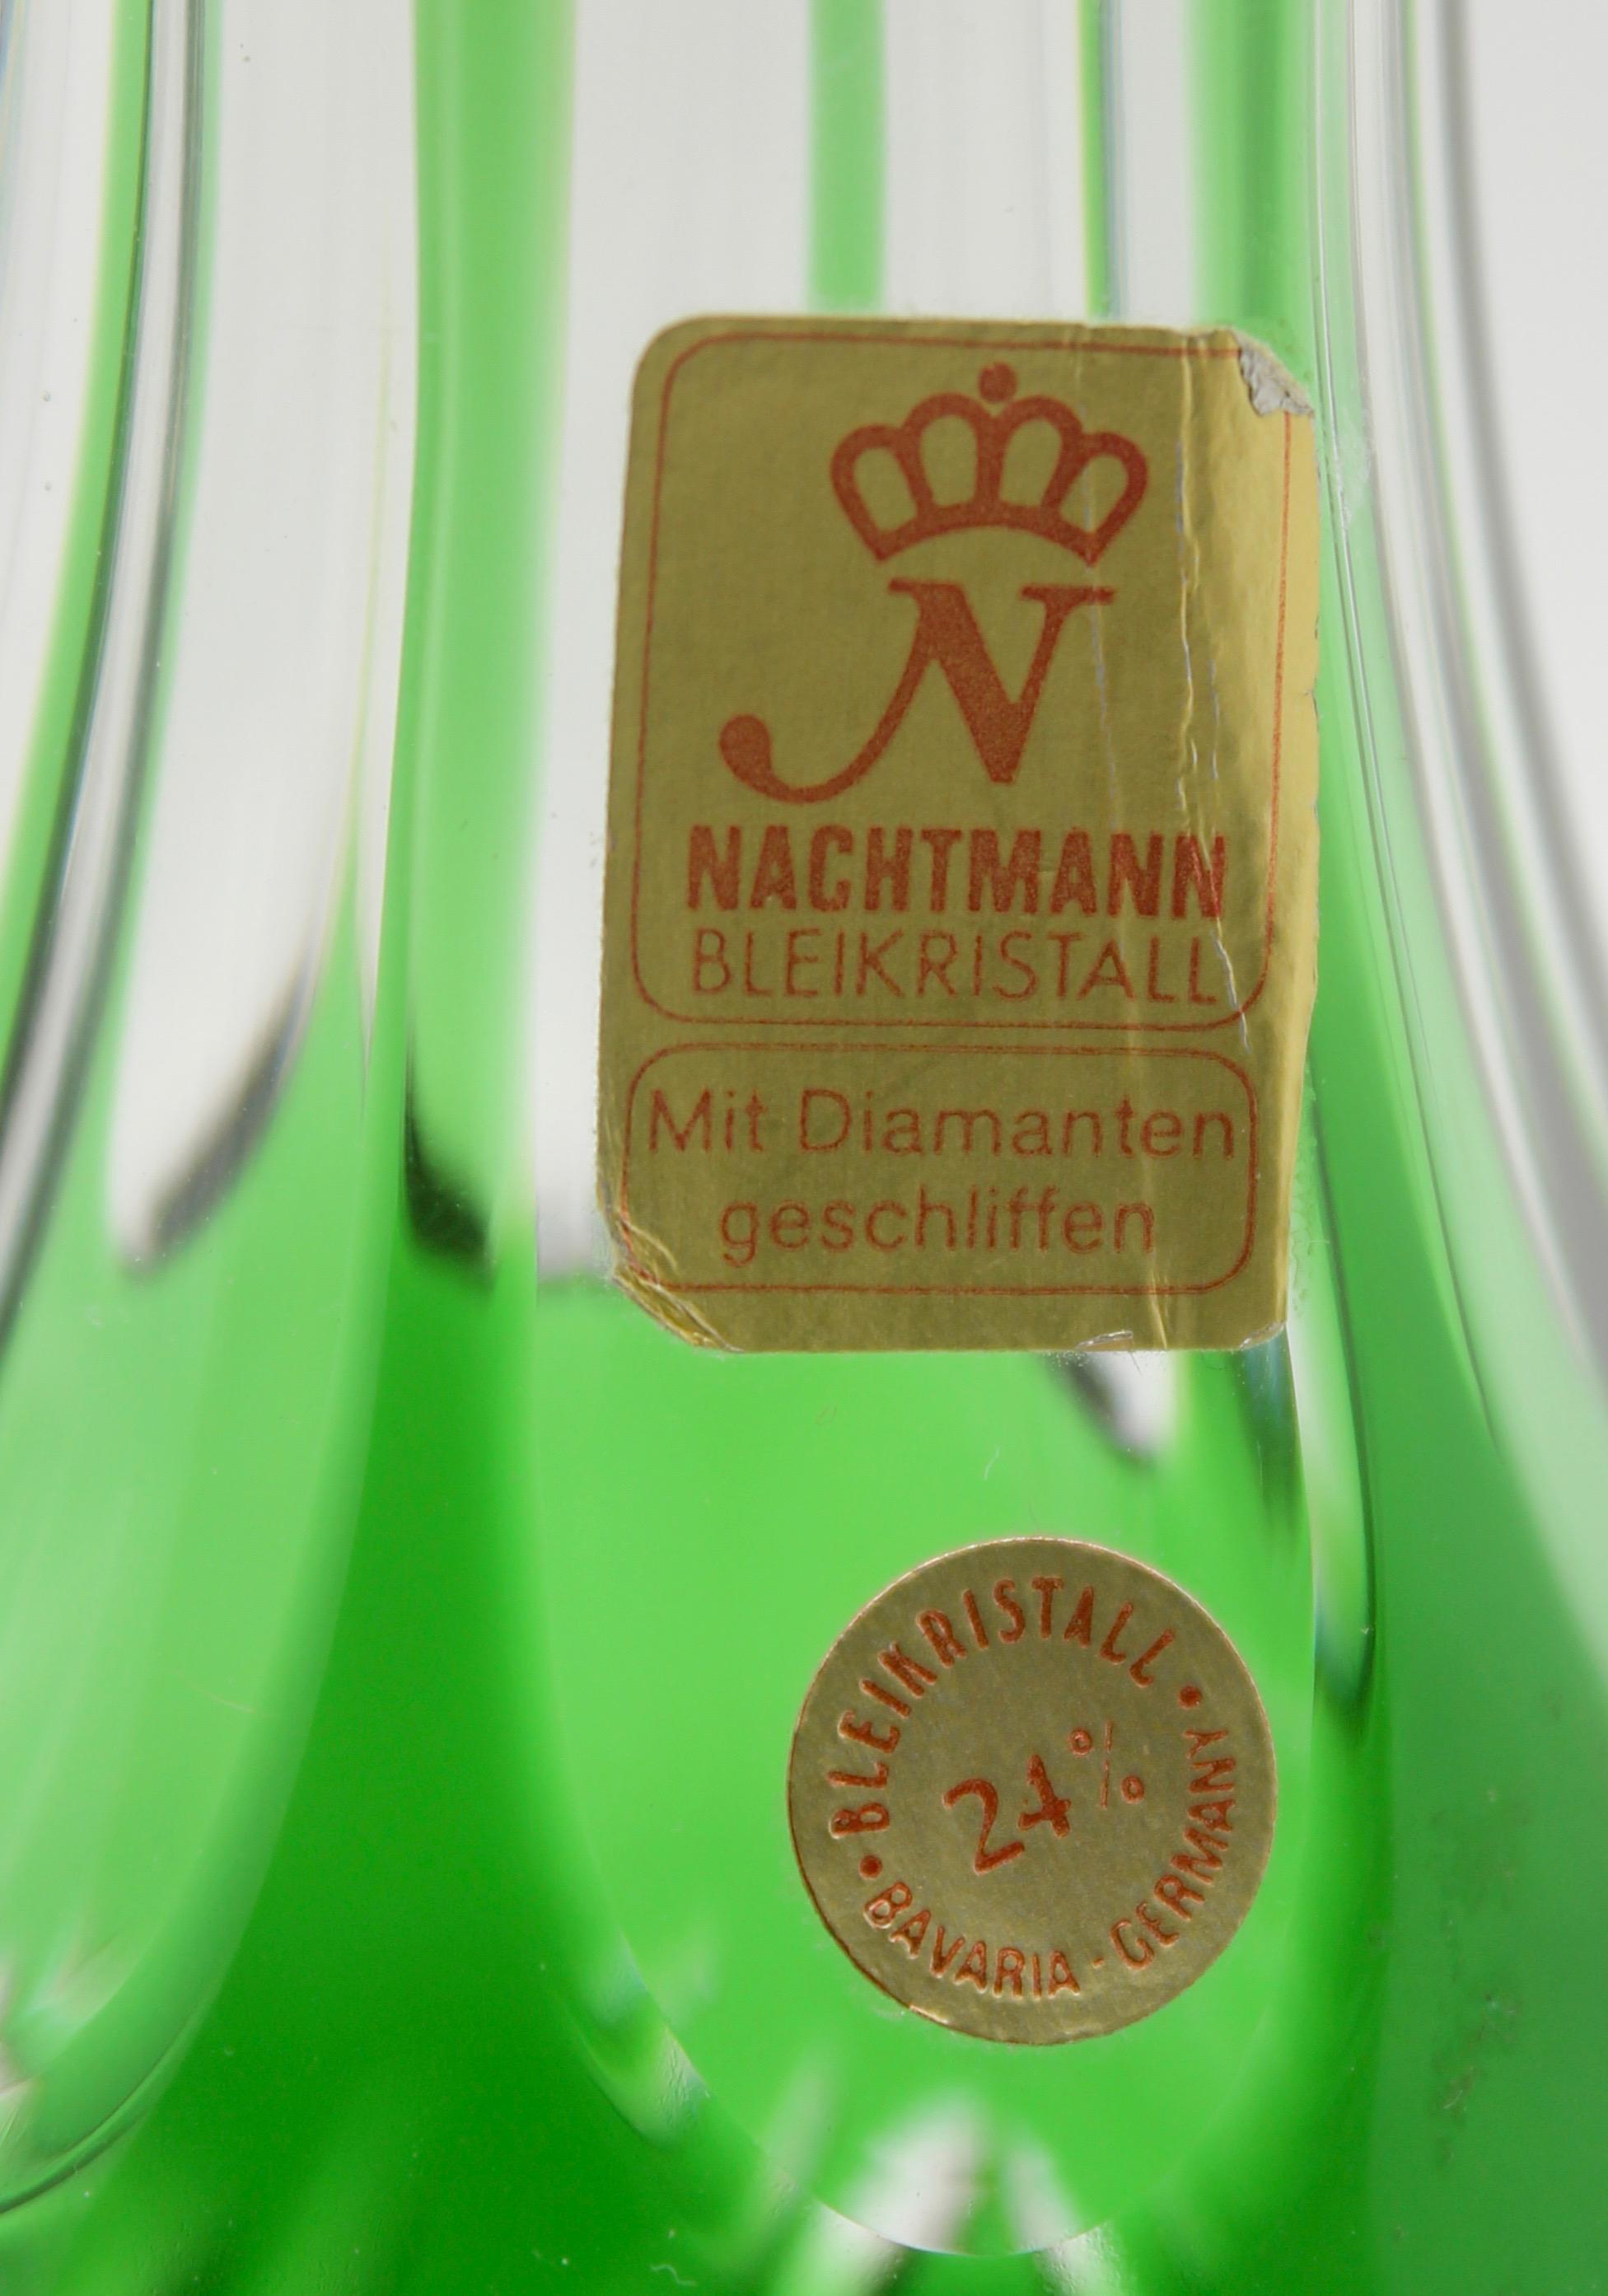 This full lead (24% PbO) crystal decanter is a vintage piece produced by F. X. Nachtmann Bleikristallwerke GmbH, Neustadt a. d. Waldnaab, Bavaria.

It is in excellent condition.
Never used, like new.
The original gold foil sticker is still in